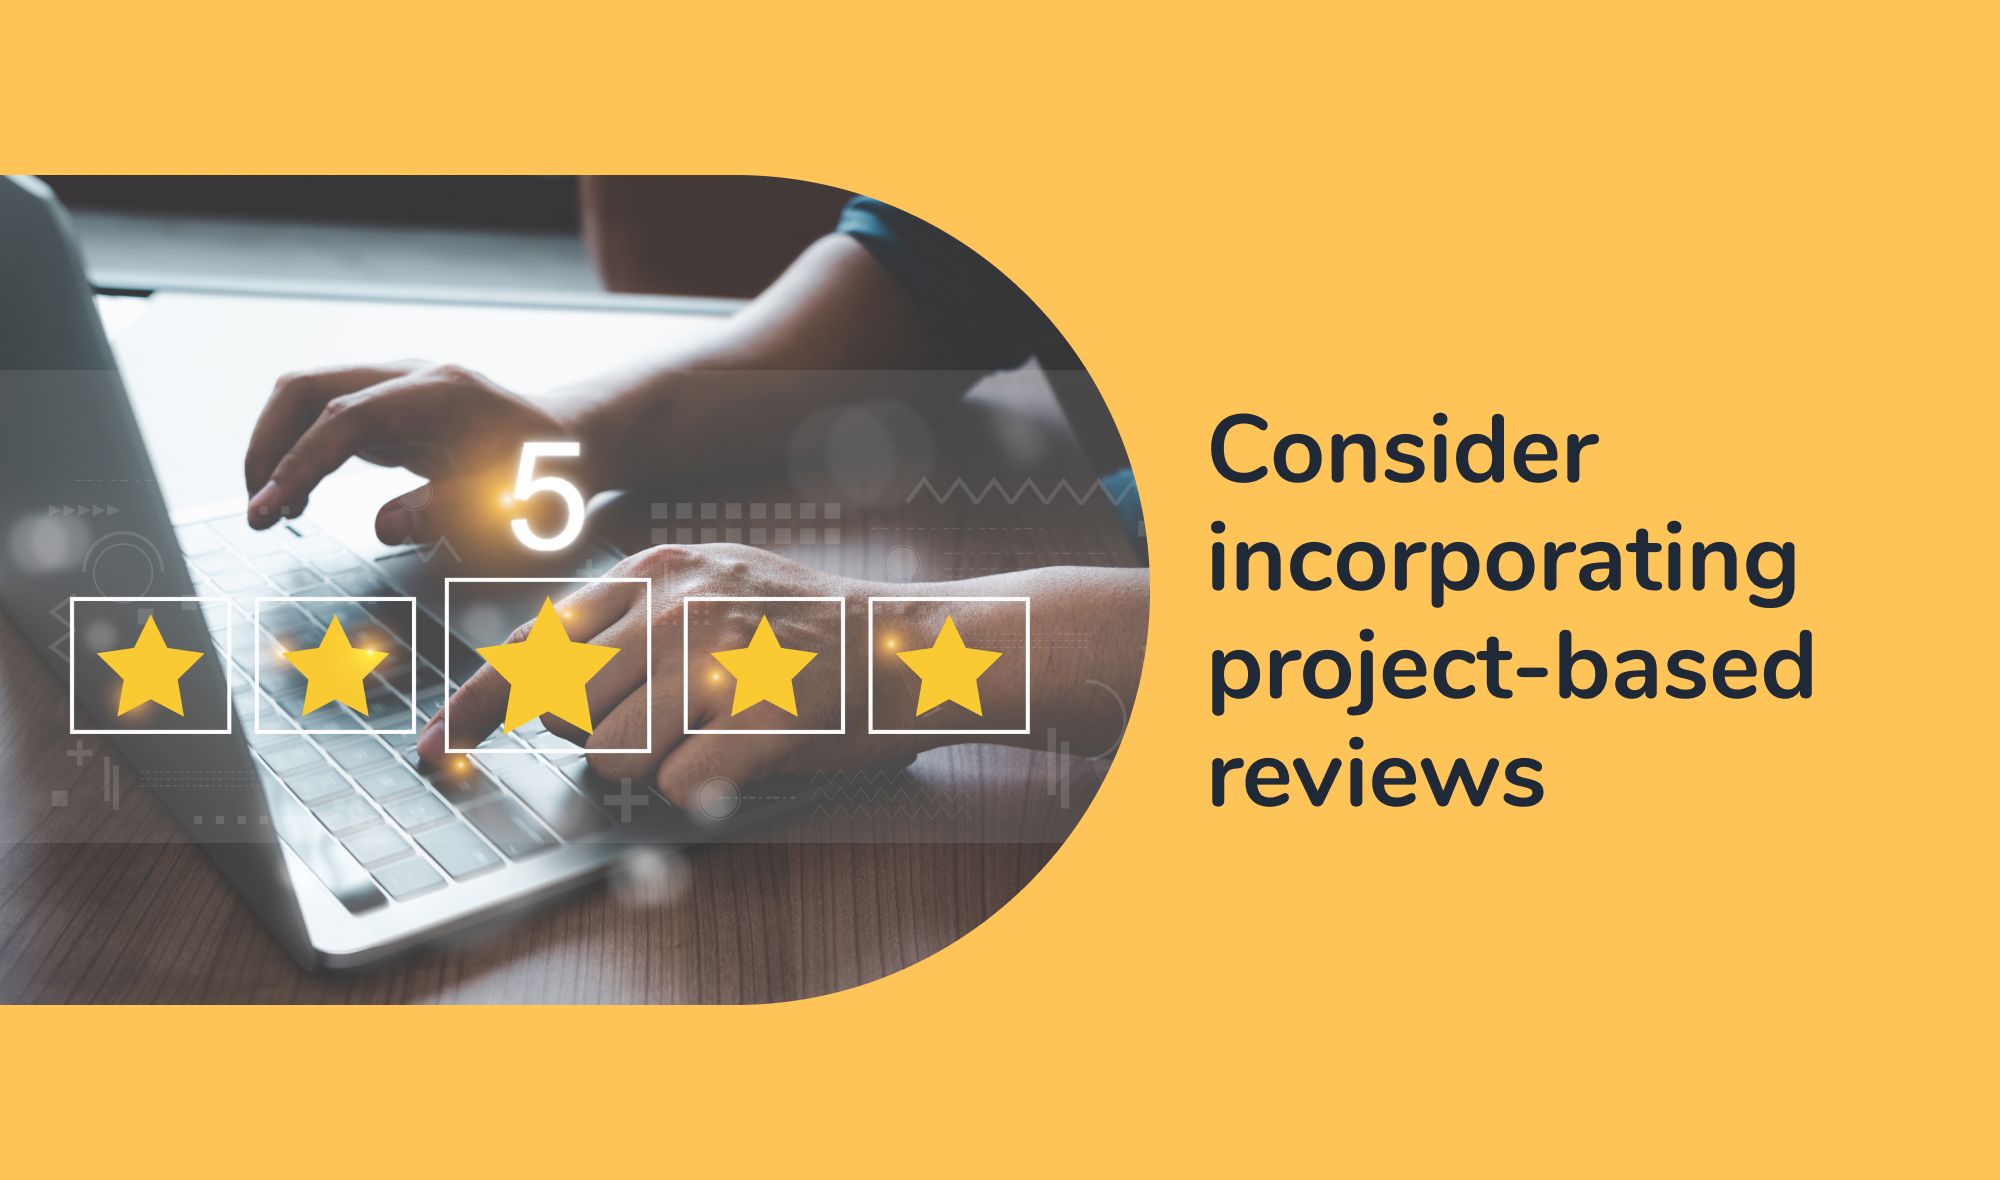 High performance management - Consider incorporating project-based reviews